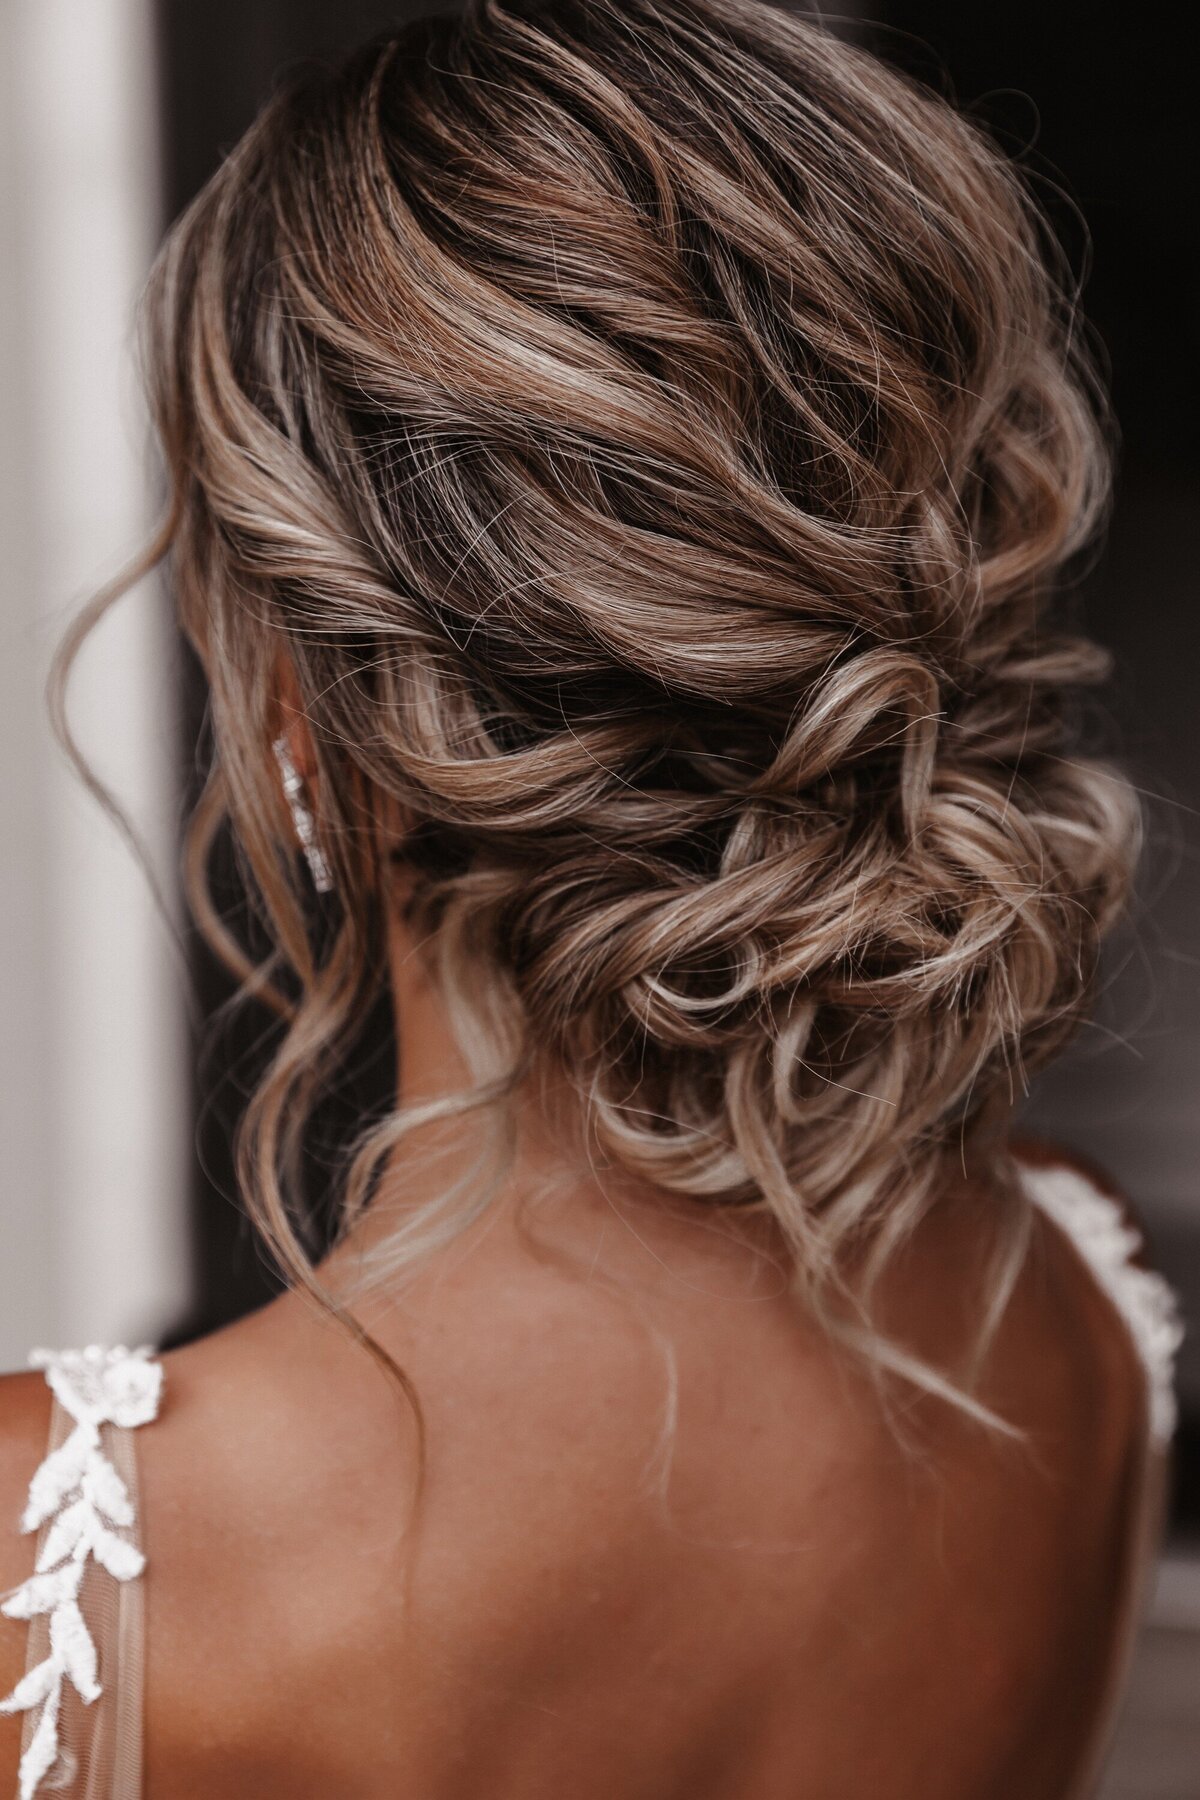 Elopement photography, whimsical bridal updo from behind on curly golden hair